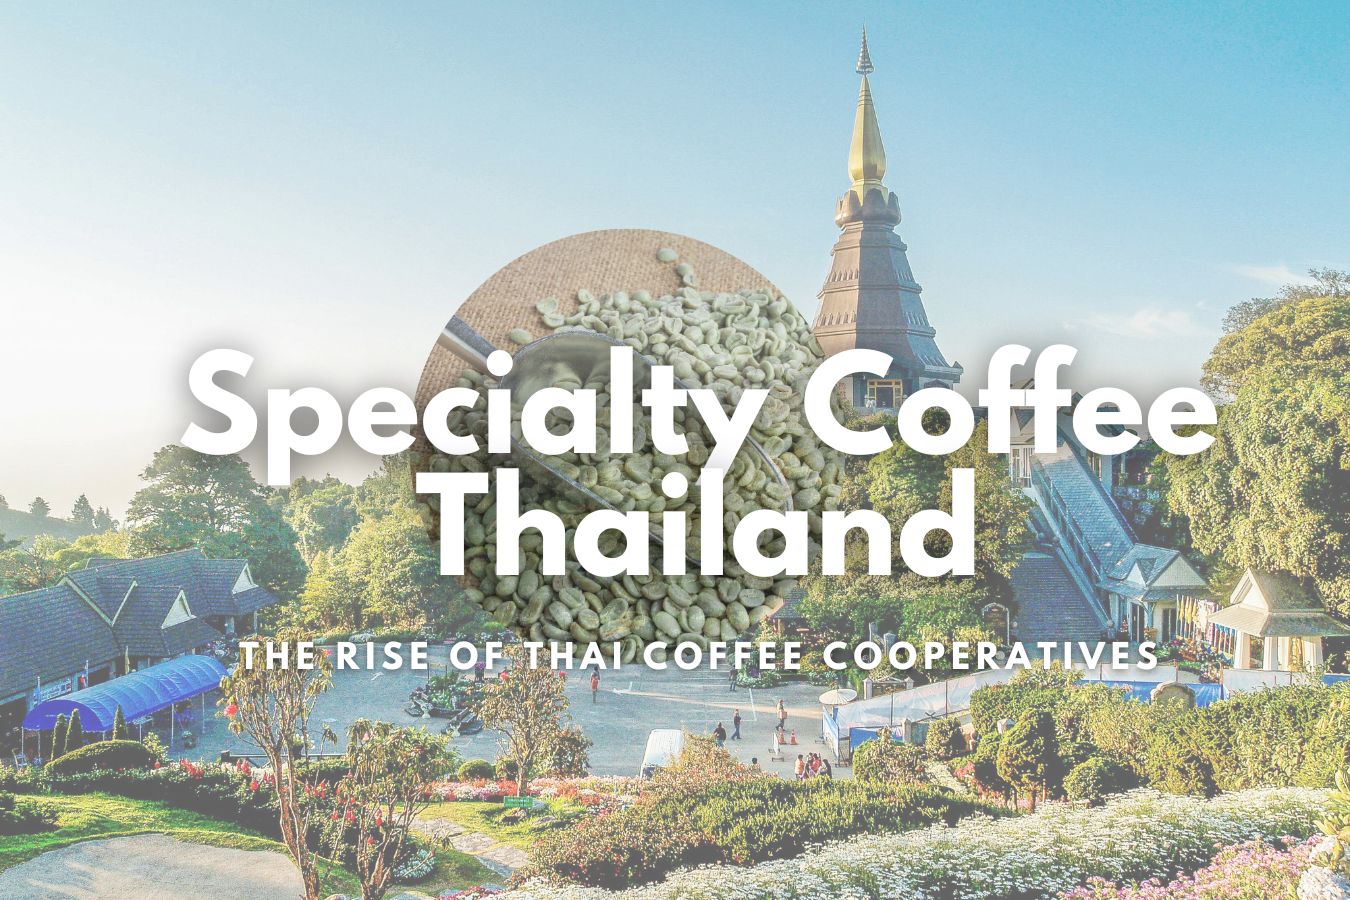 Specialty Coffee Thailand The Rise of Thai Coffee Cooperatives